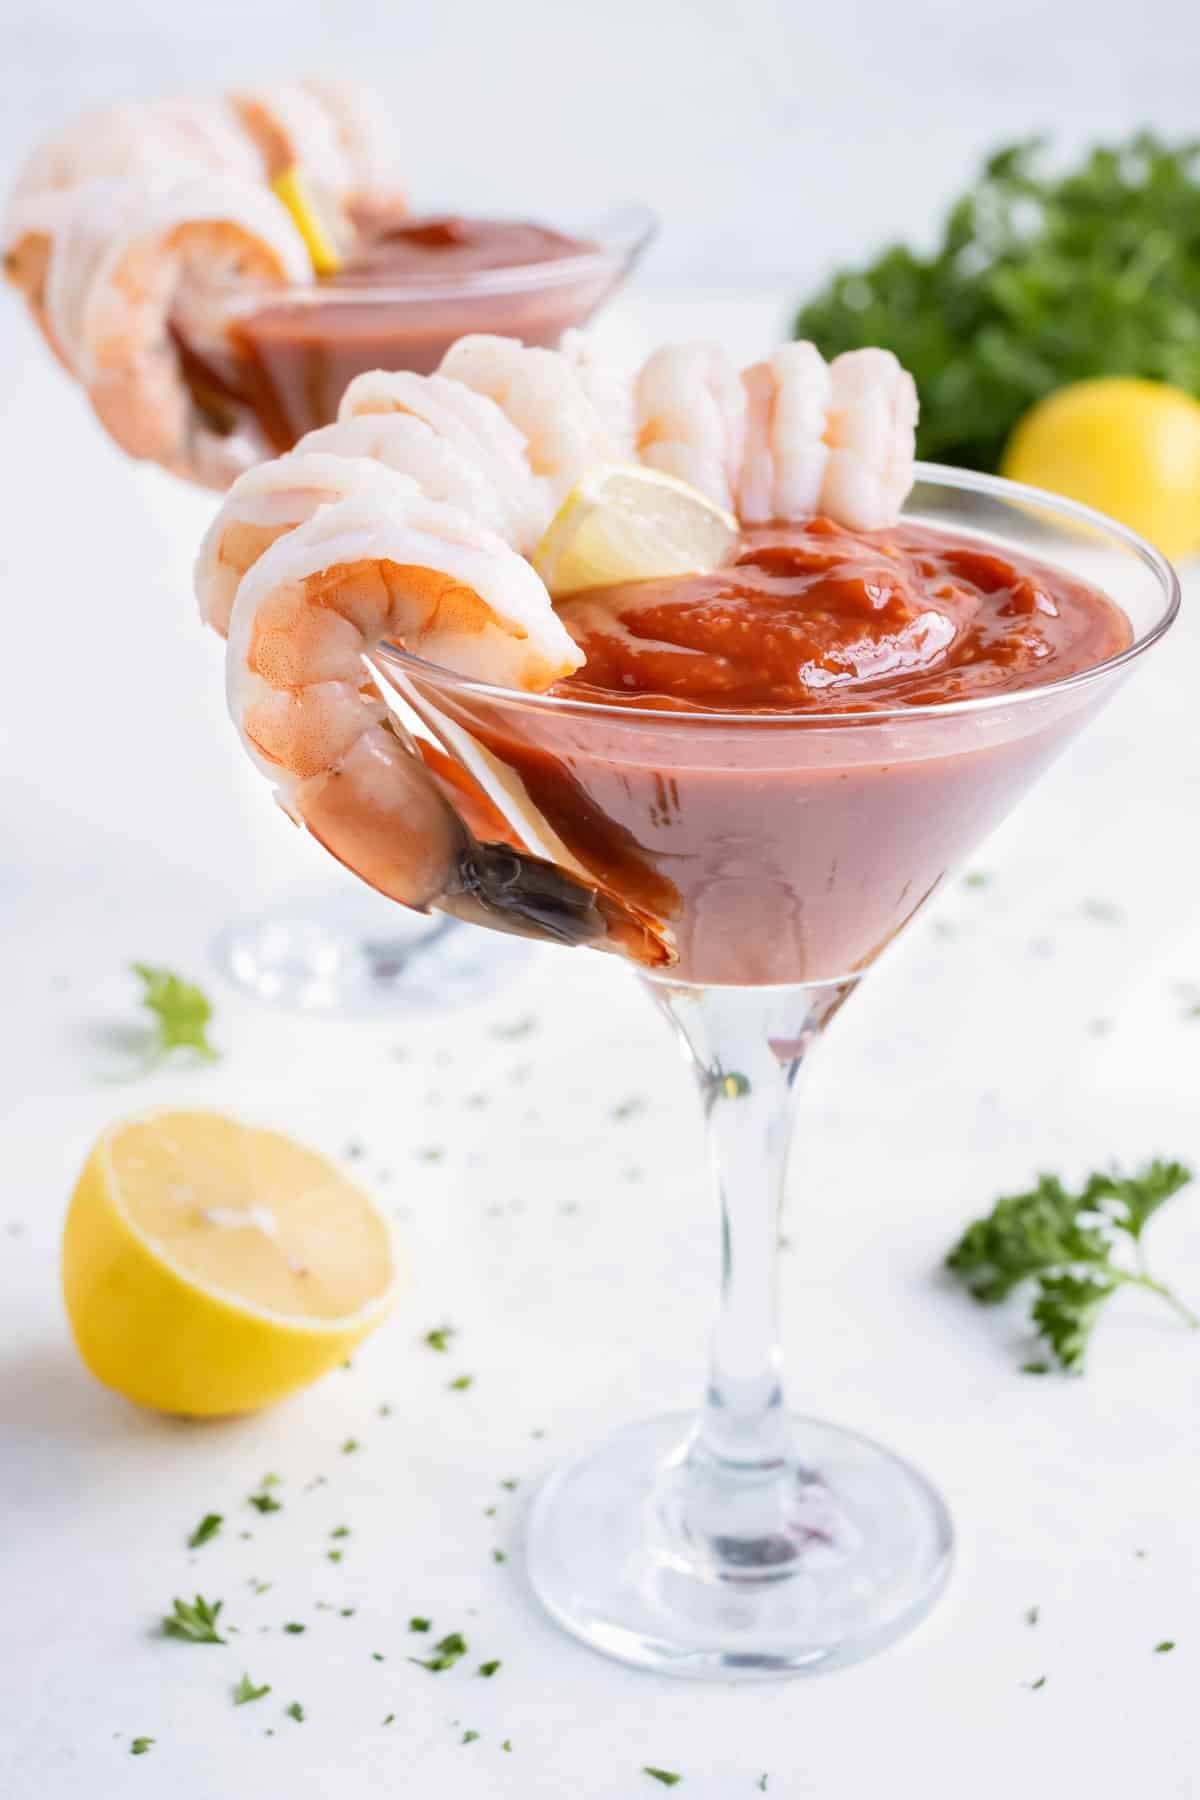 Shrimp is served with a glass of cocktail sauce.